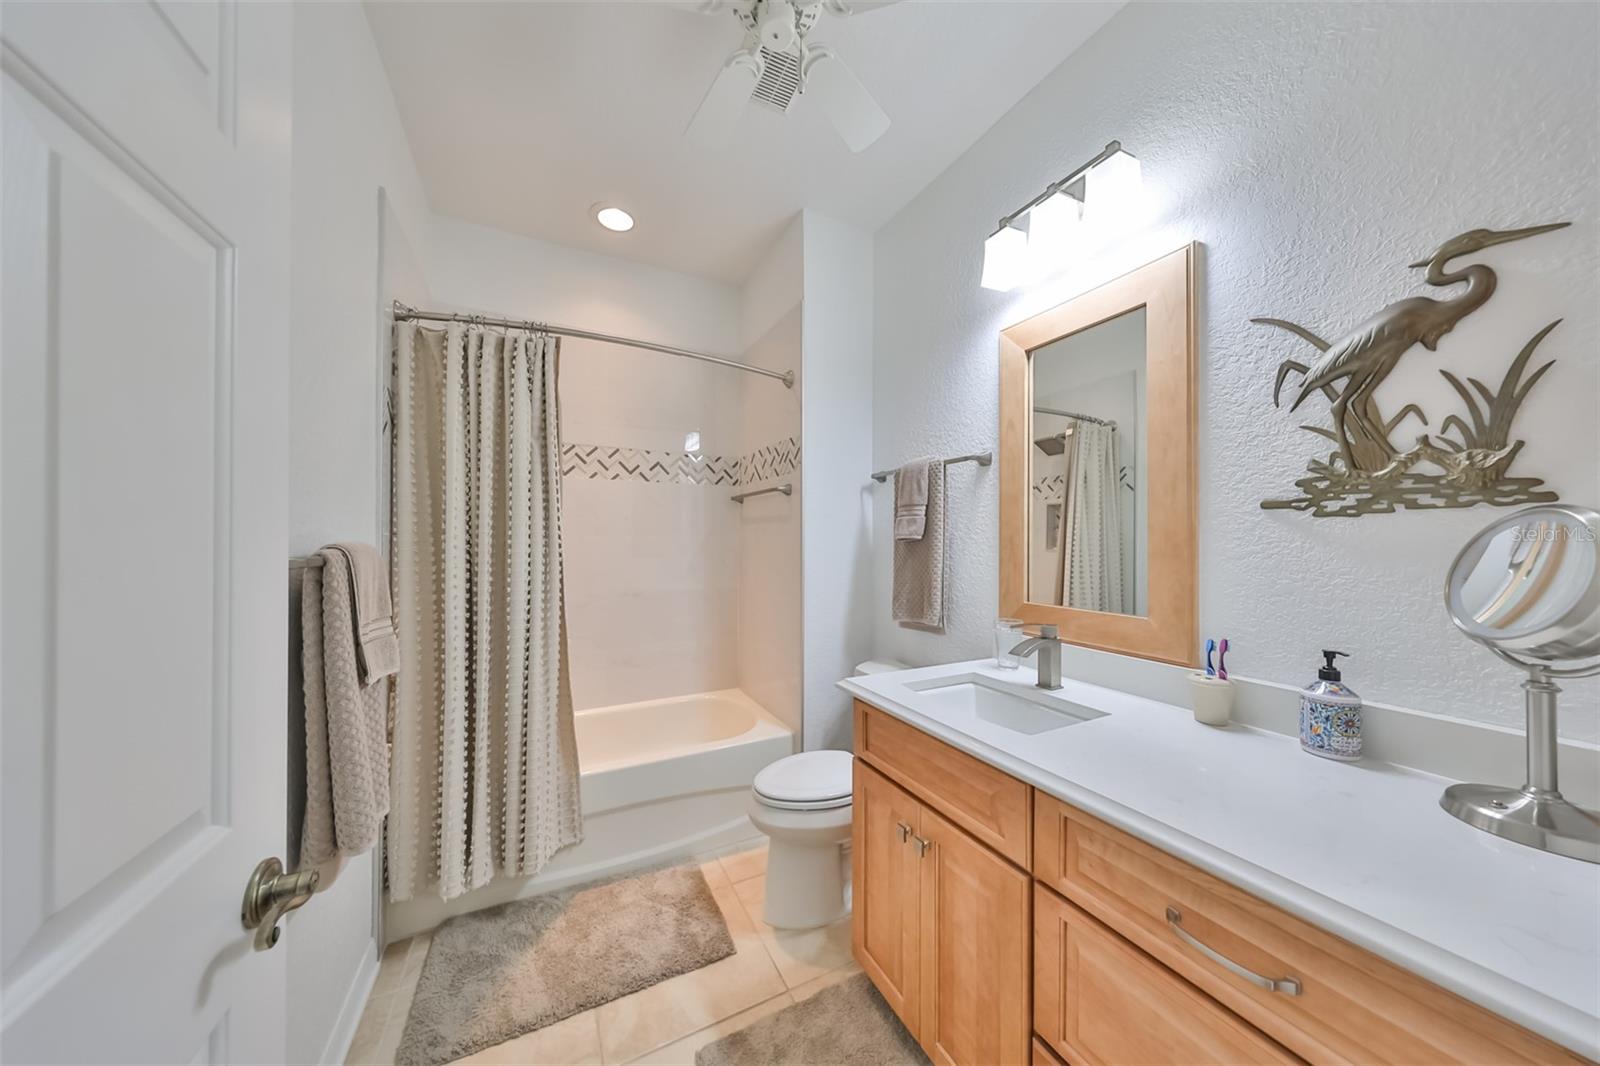 Updated guest bathroom with dual sinks, matching wood features and neutral colors.